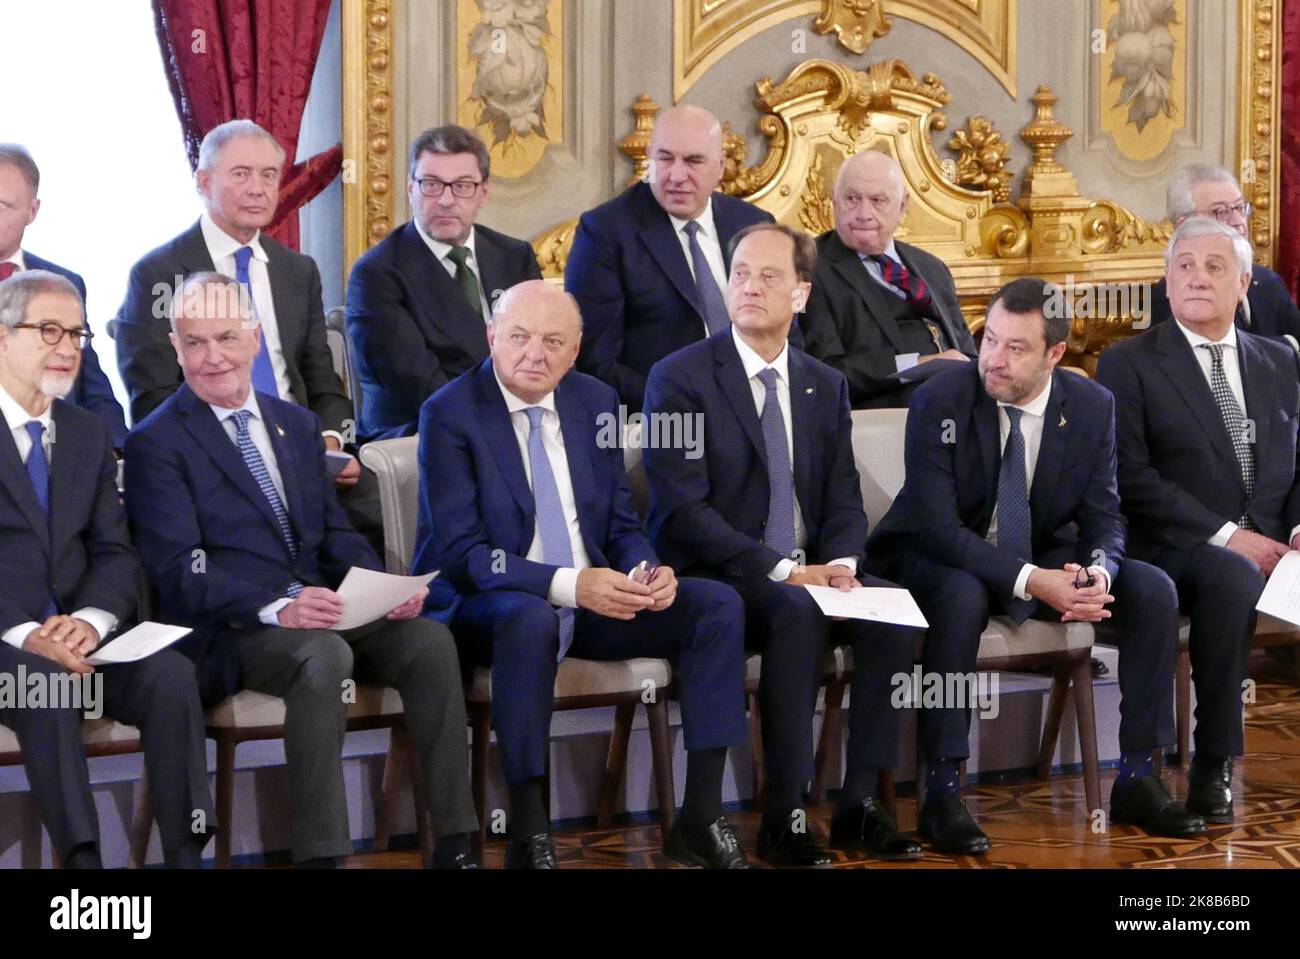 Rome, Italy. 22nd Oct, 2022. New Italian Ministers are going to swear the oath of Loyalty to the Italian Republic in Salone delle Feste at Palazzo del Quirinale, Rome, Italy, October 22 2022. On the far right in the first row, the two Deputy Prime Ministers Matteo Salvini and Antonio Tajani. (Photo by Elisa Gestri/SIPA USA) Credit: Sipa USA/Alamy Live News Stock Photo